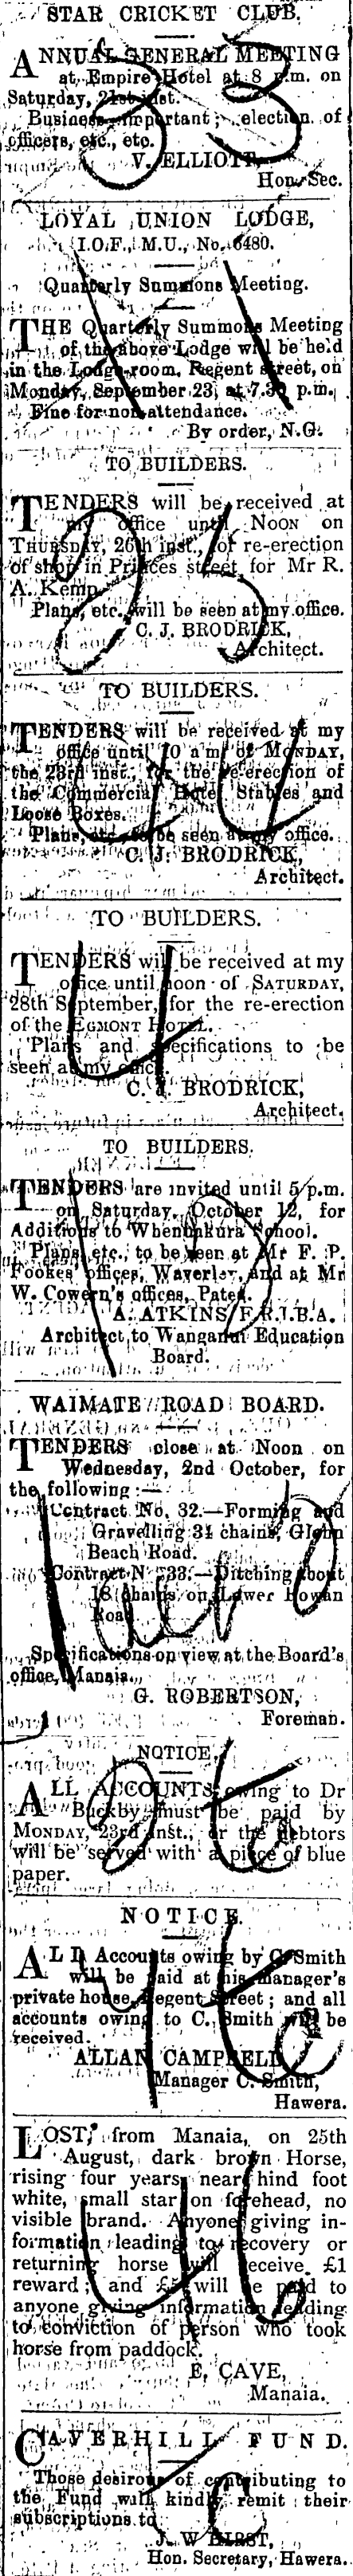 Papers Past Newspapers Hawera Normanby Star 21 September 15 Page 3 Advertisements Column 2